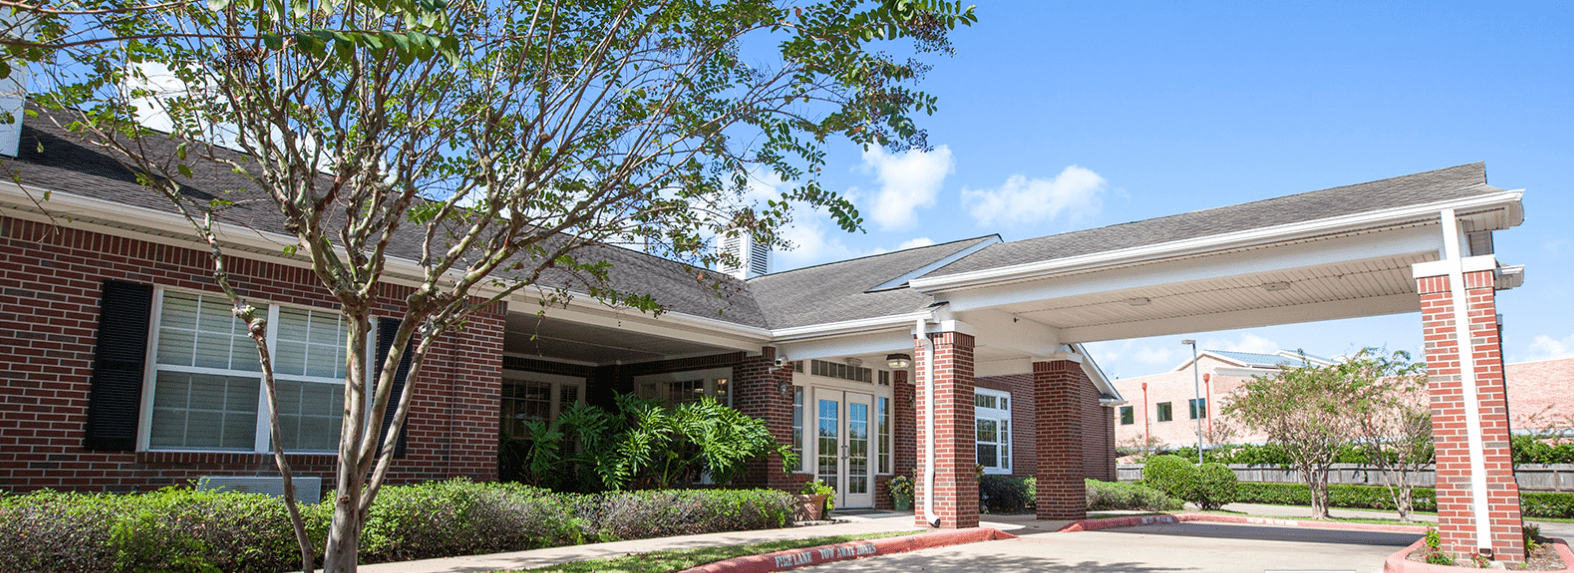 Brookdale Galleria  Independent & Assisted Living Houston TX